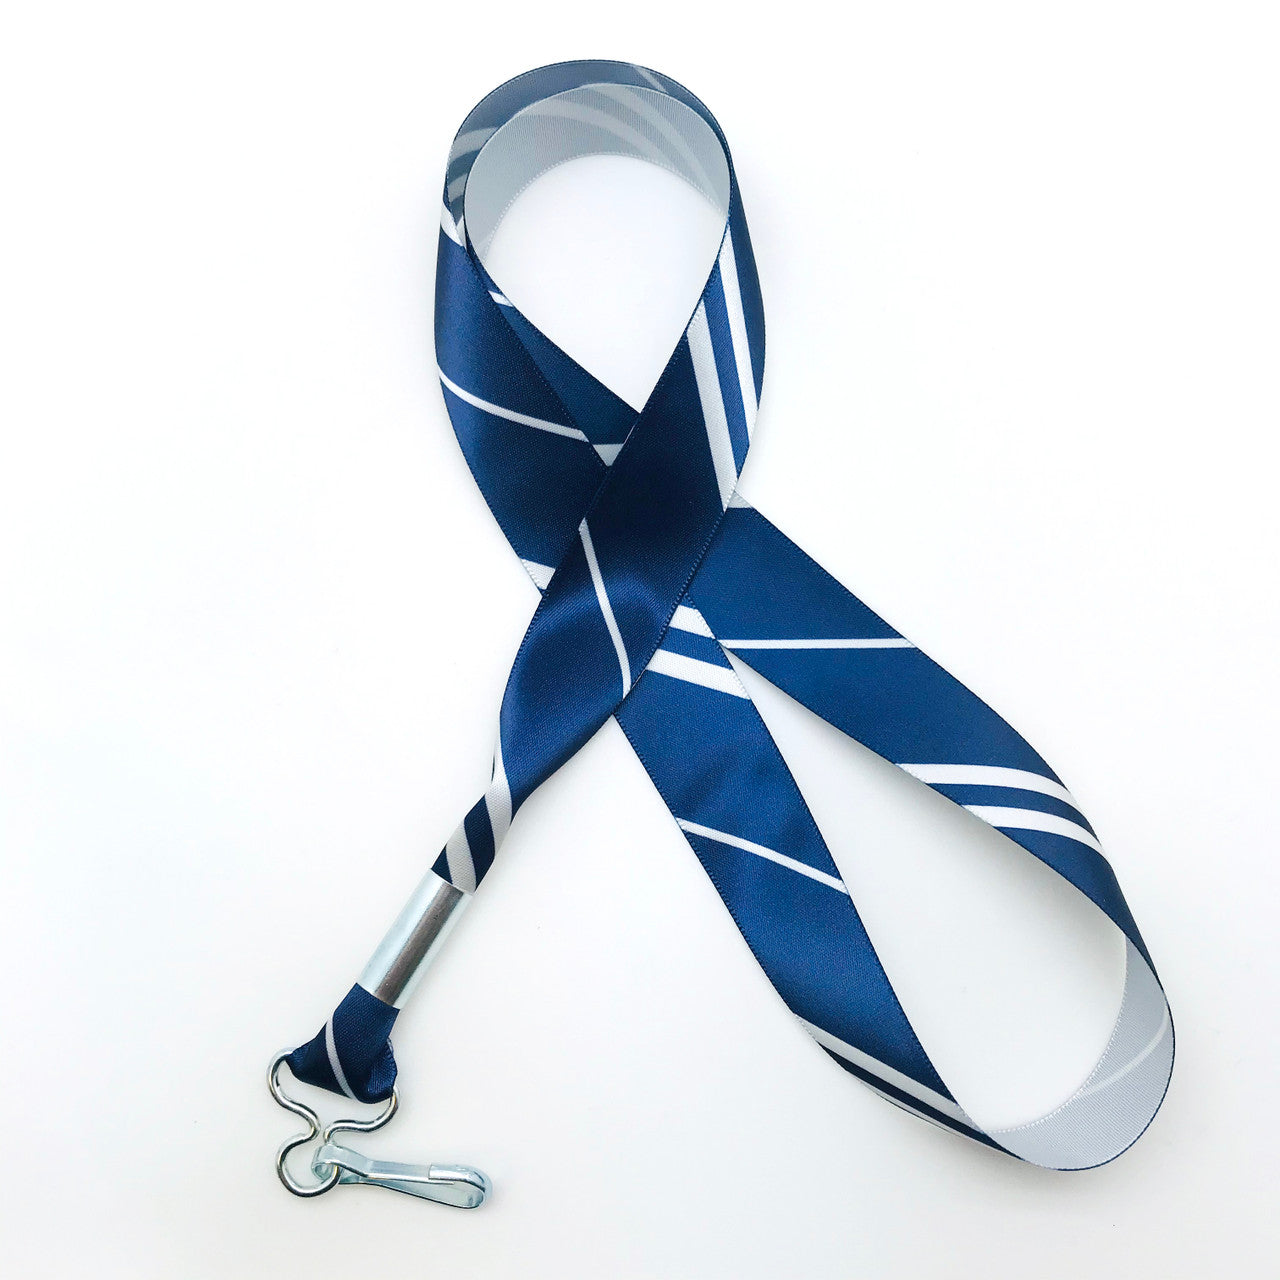 Hogwarts Ravenclaw house ribbon lanyard in blue and silver stripes printed  on 7/8 gray single face satin ribbon